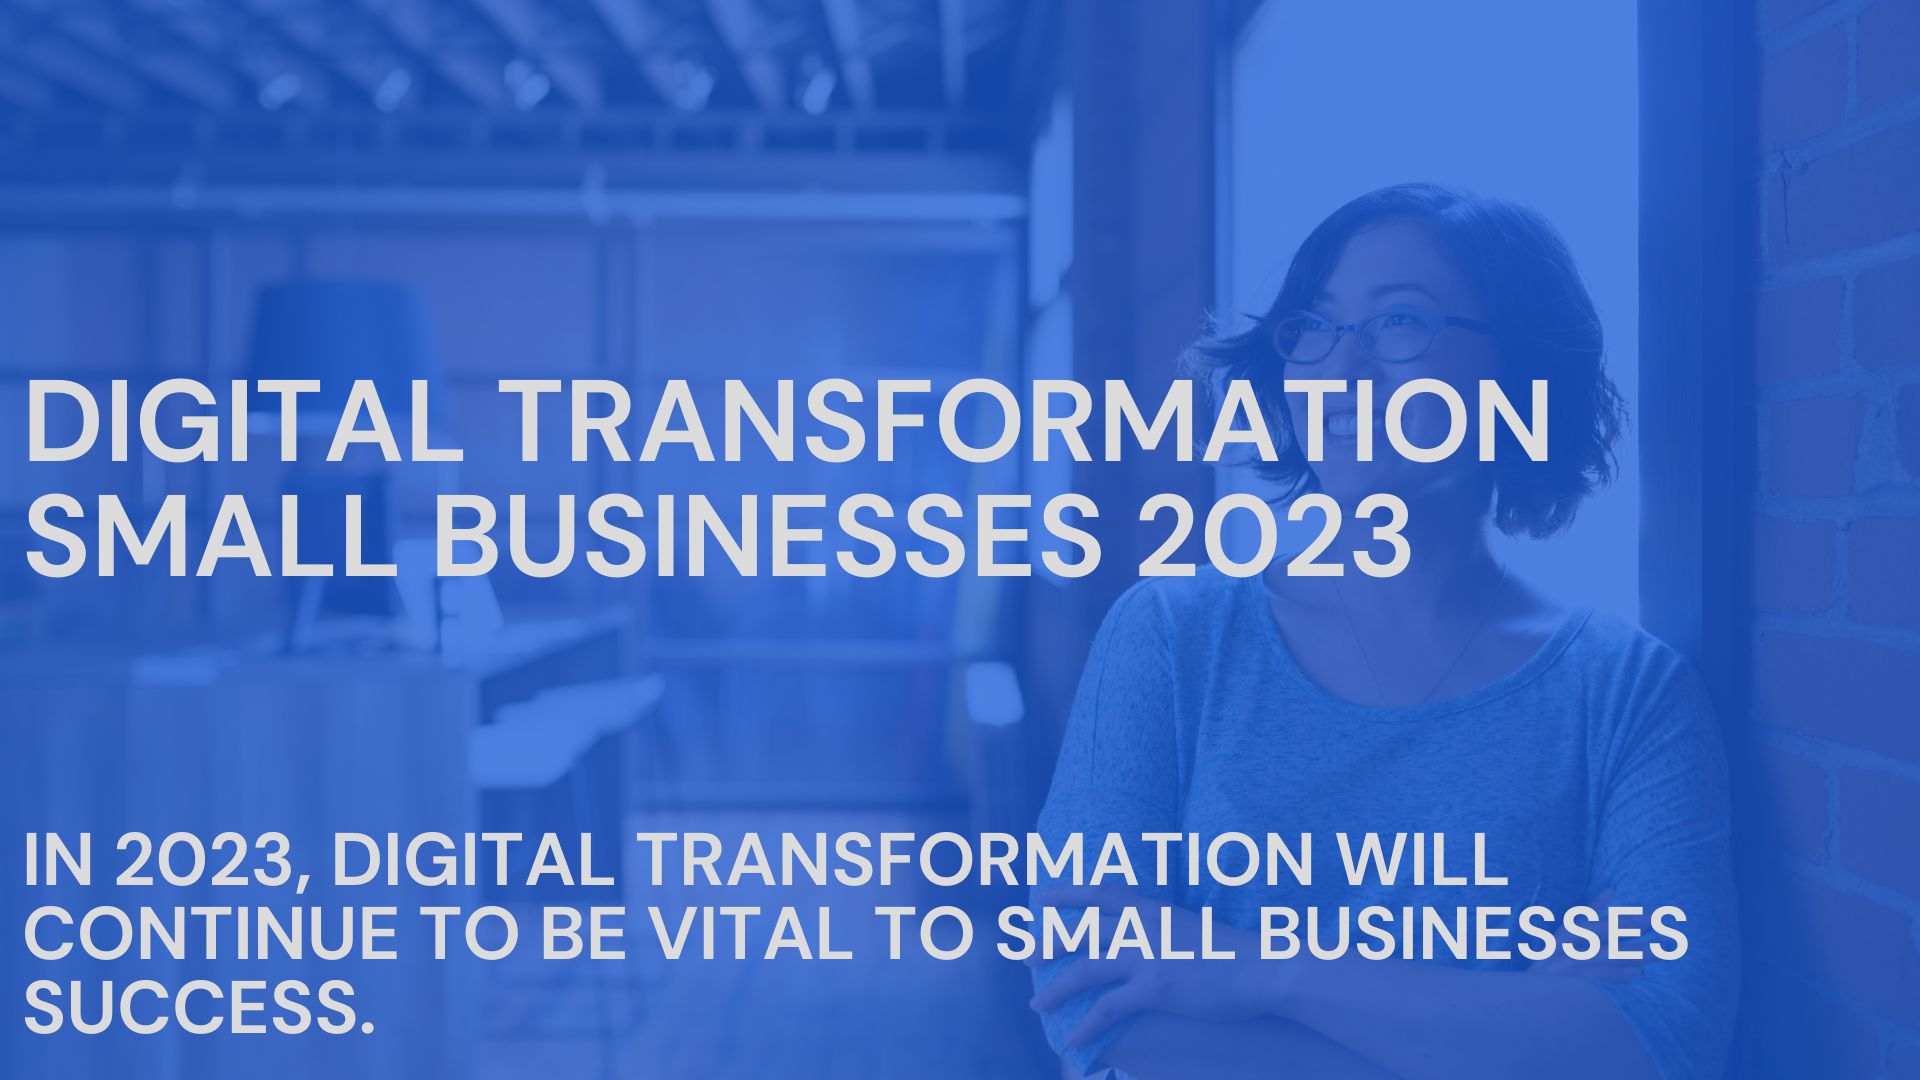 The Crucial Role of Digital Transformation for Small Businesses in 2023